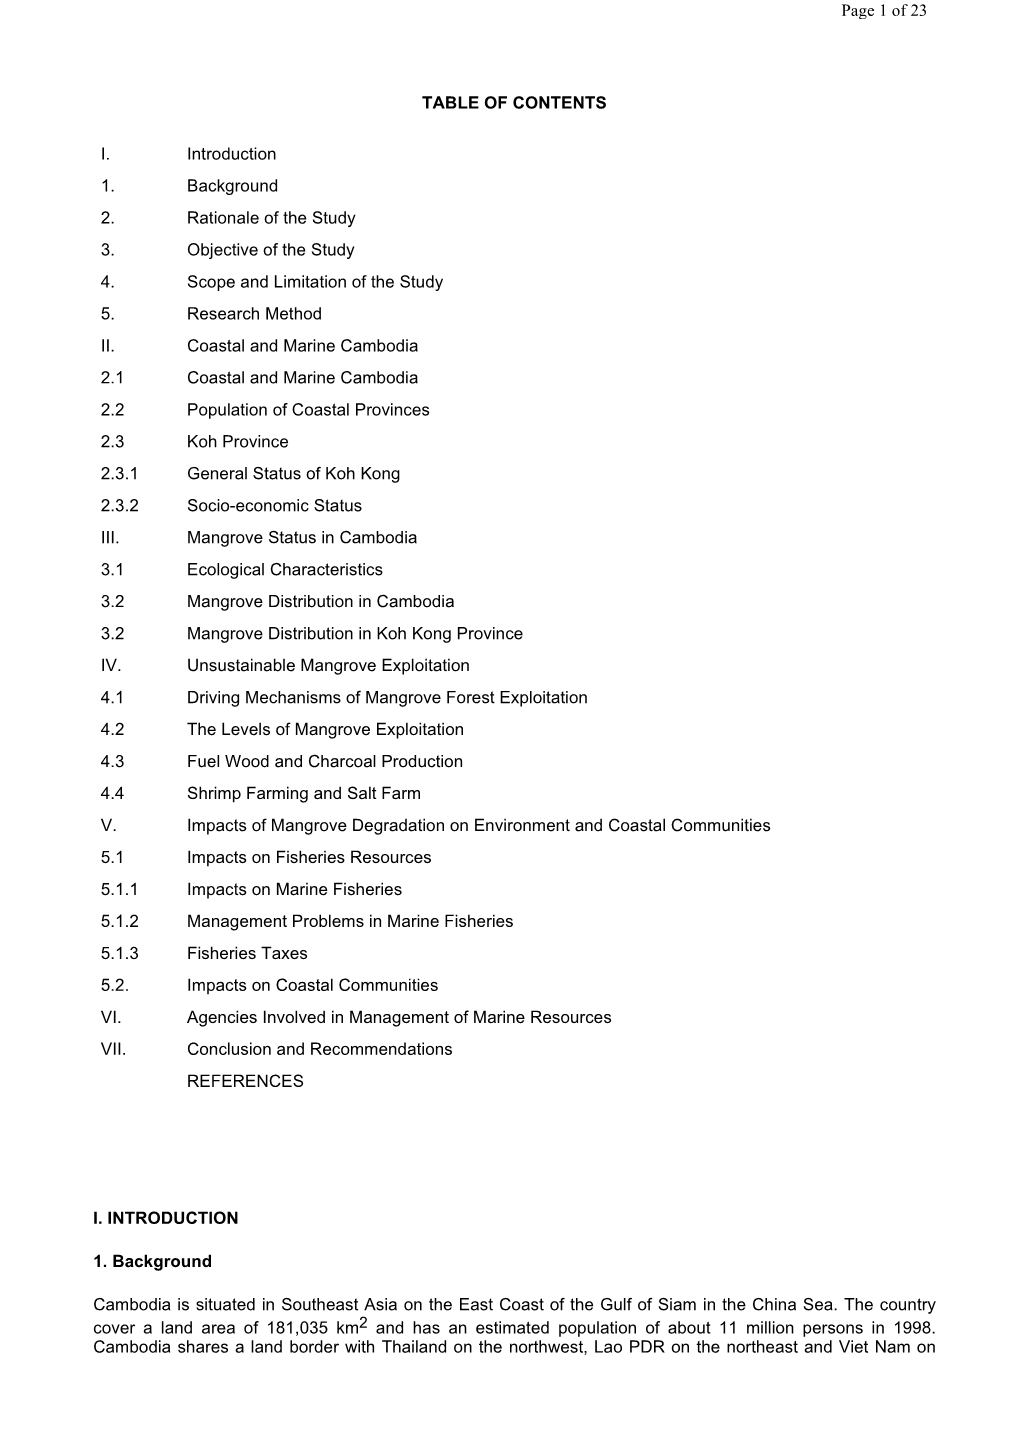 TABLE of CONTENTS I. INTRODUCTION 1. Background